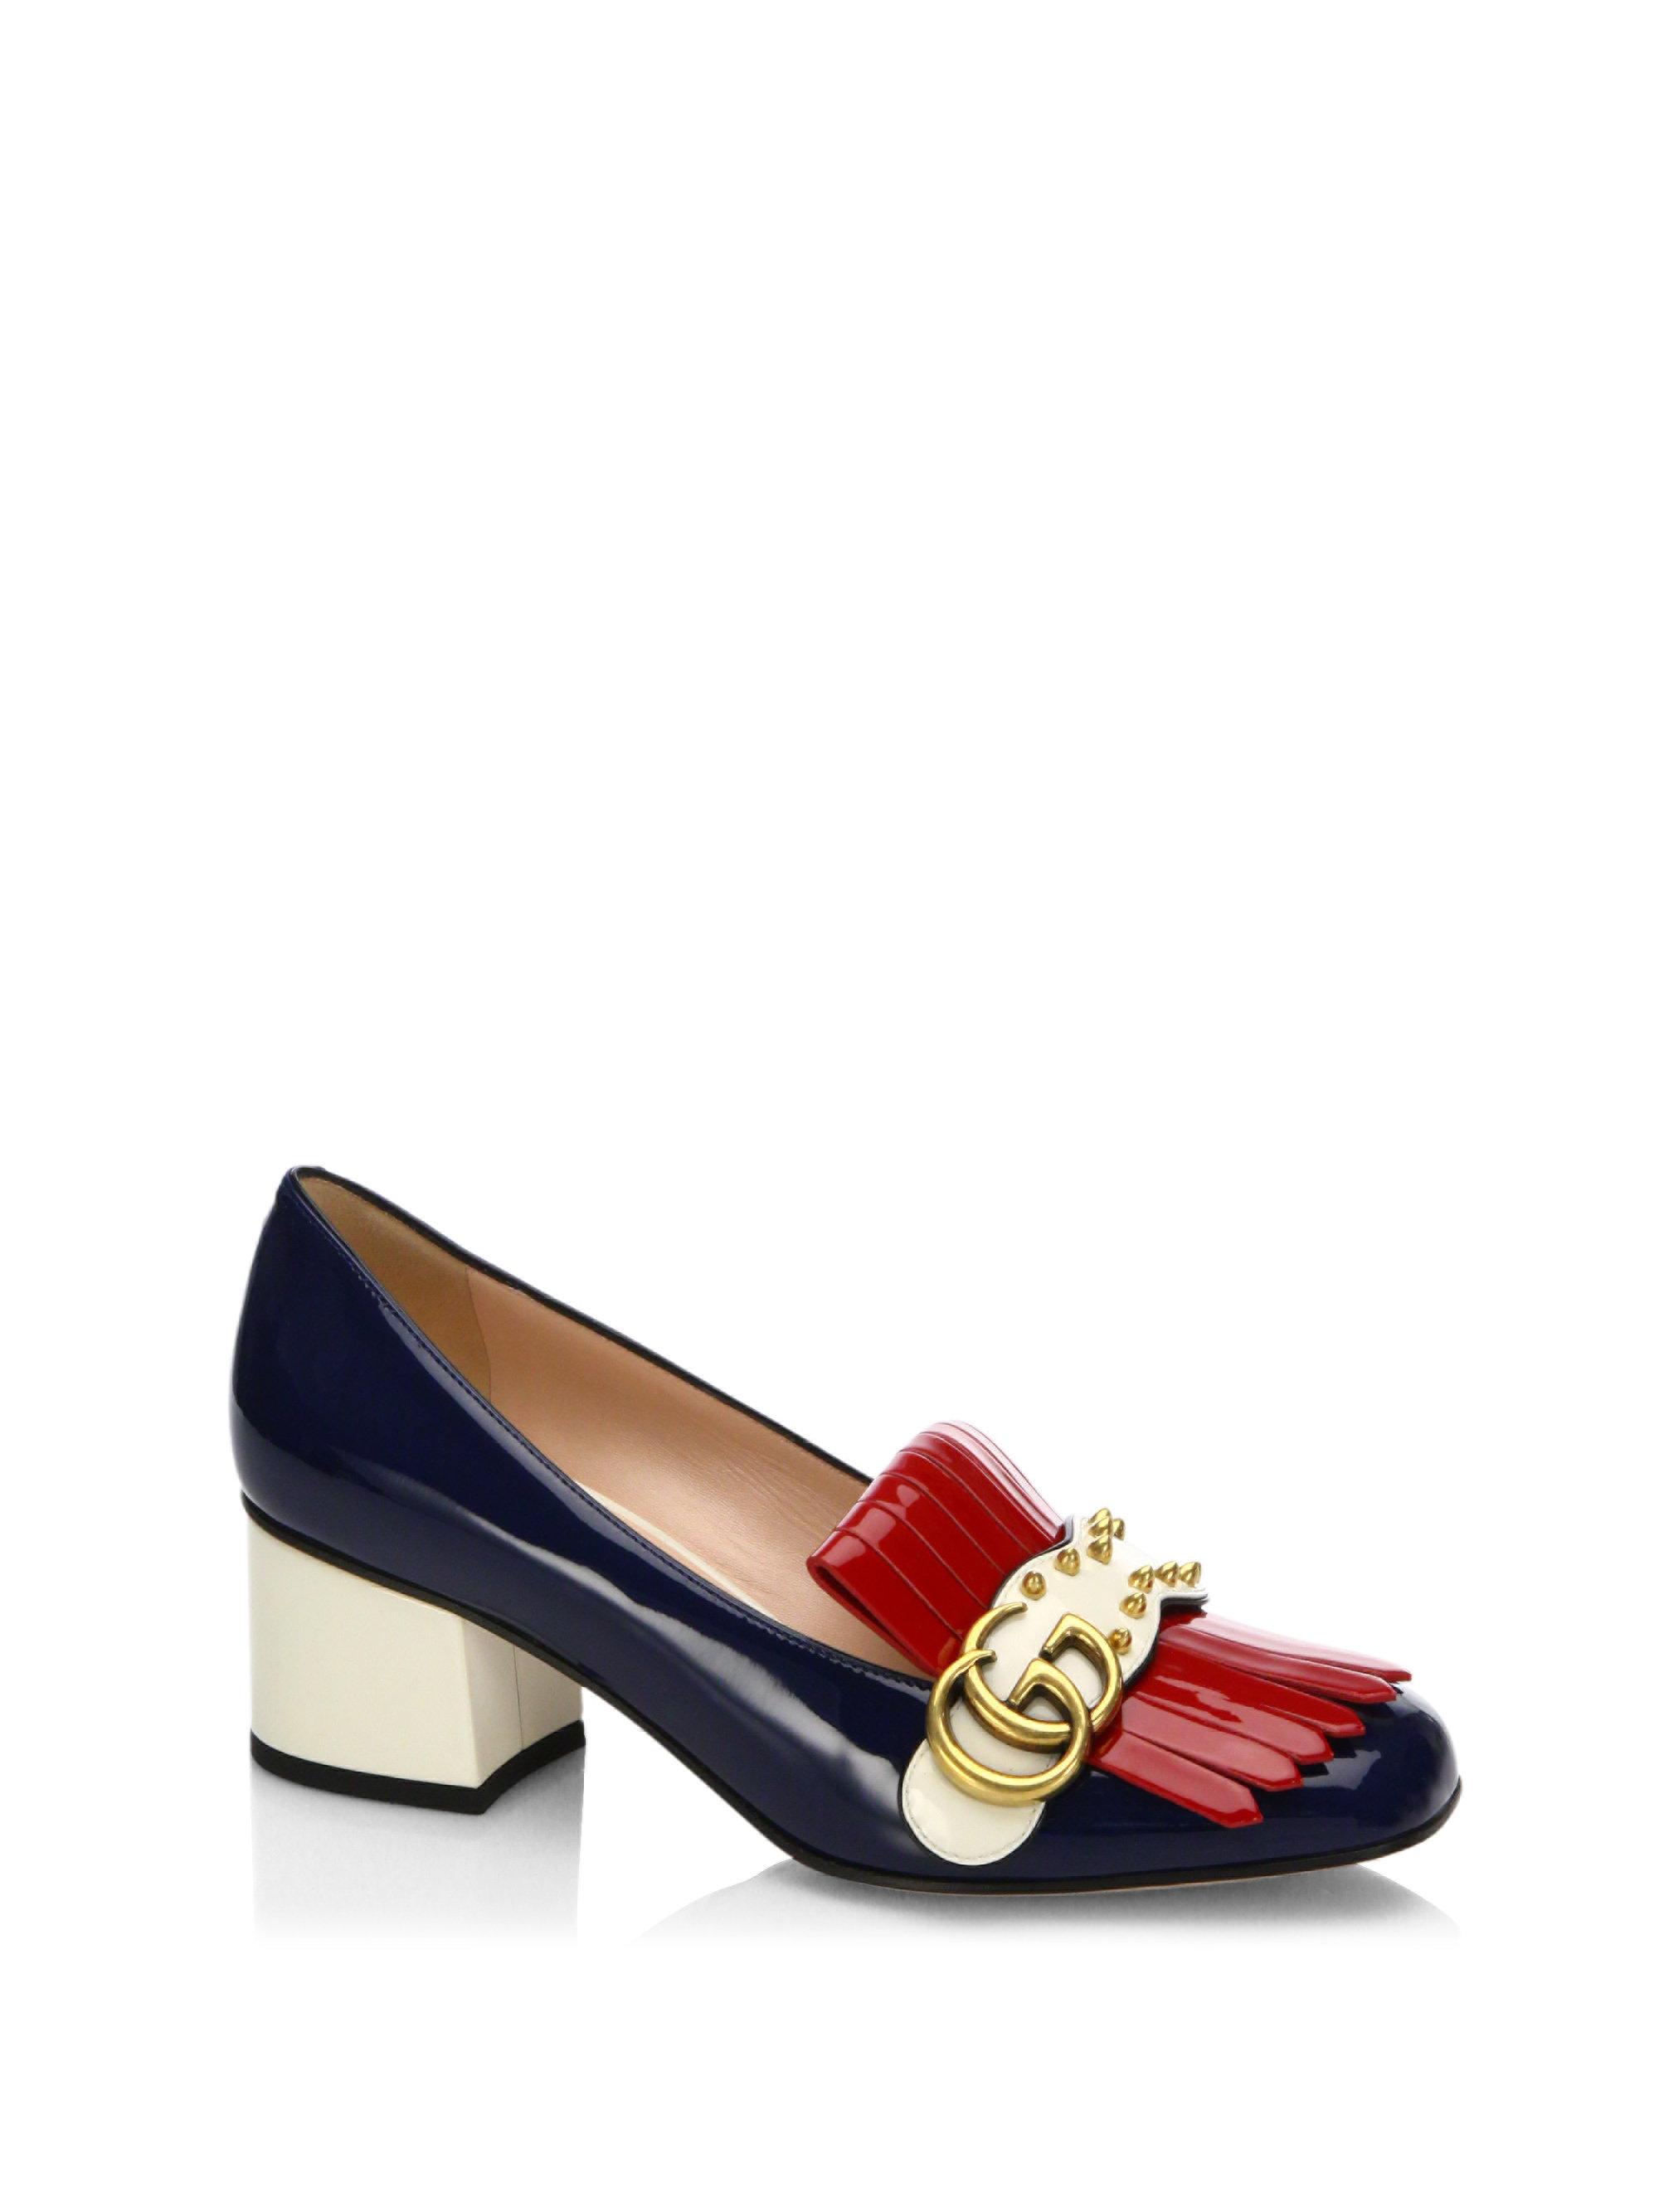 Gucci Marmont Gg Studded Tri-tone Patent Leather Loafer Pumps in Blue ...